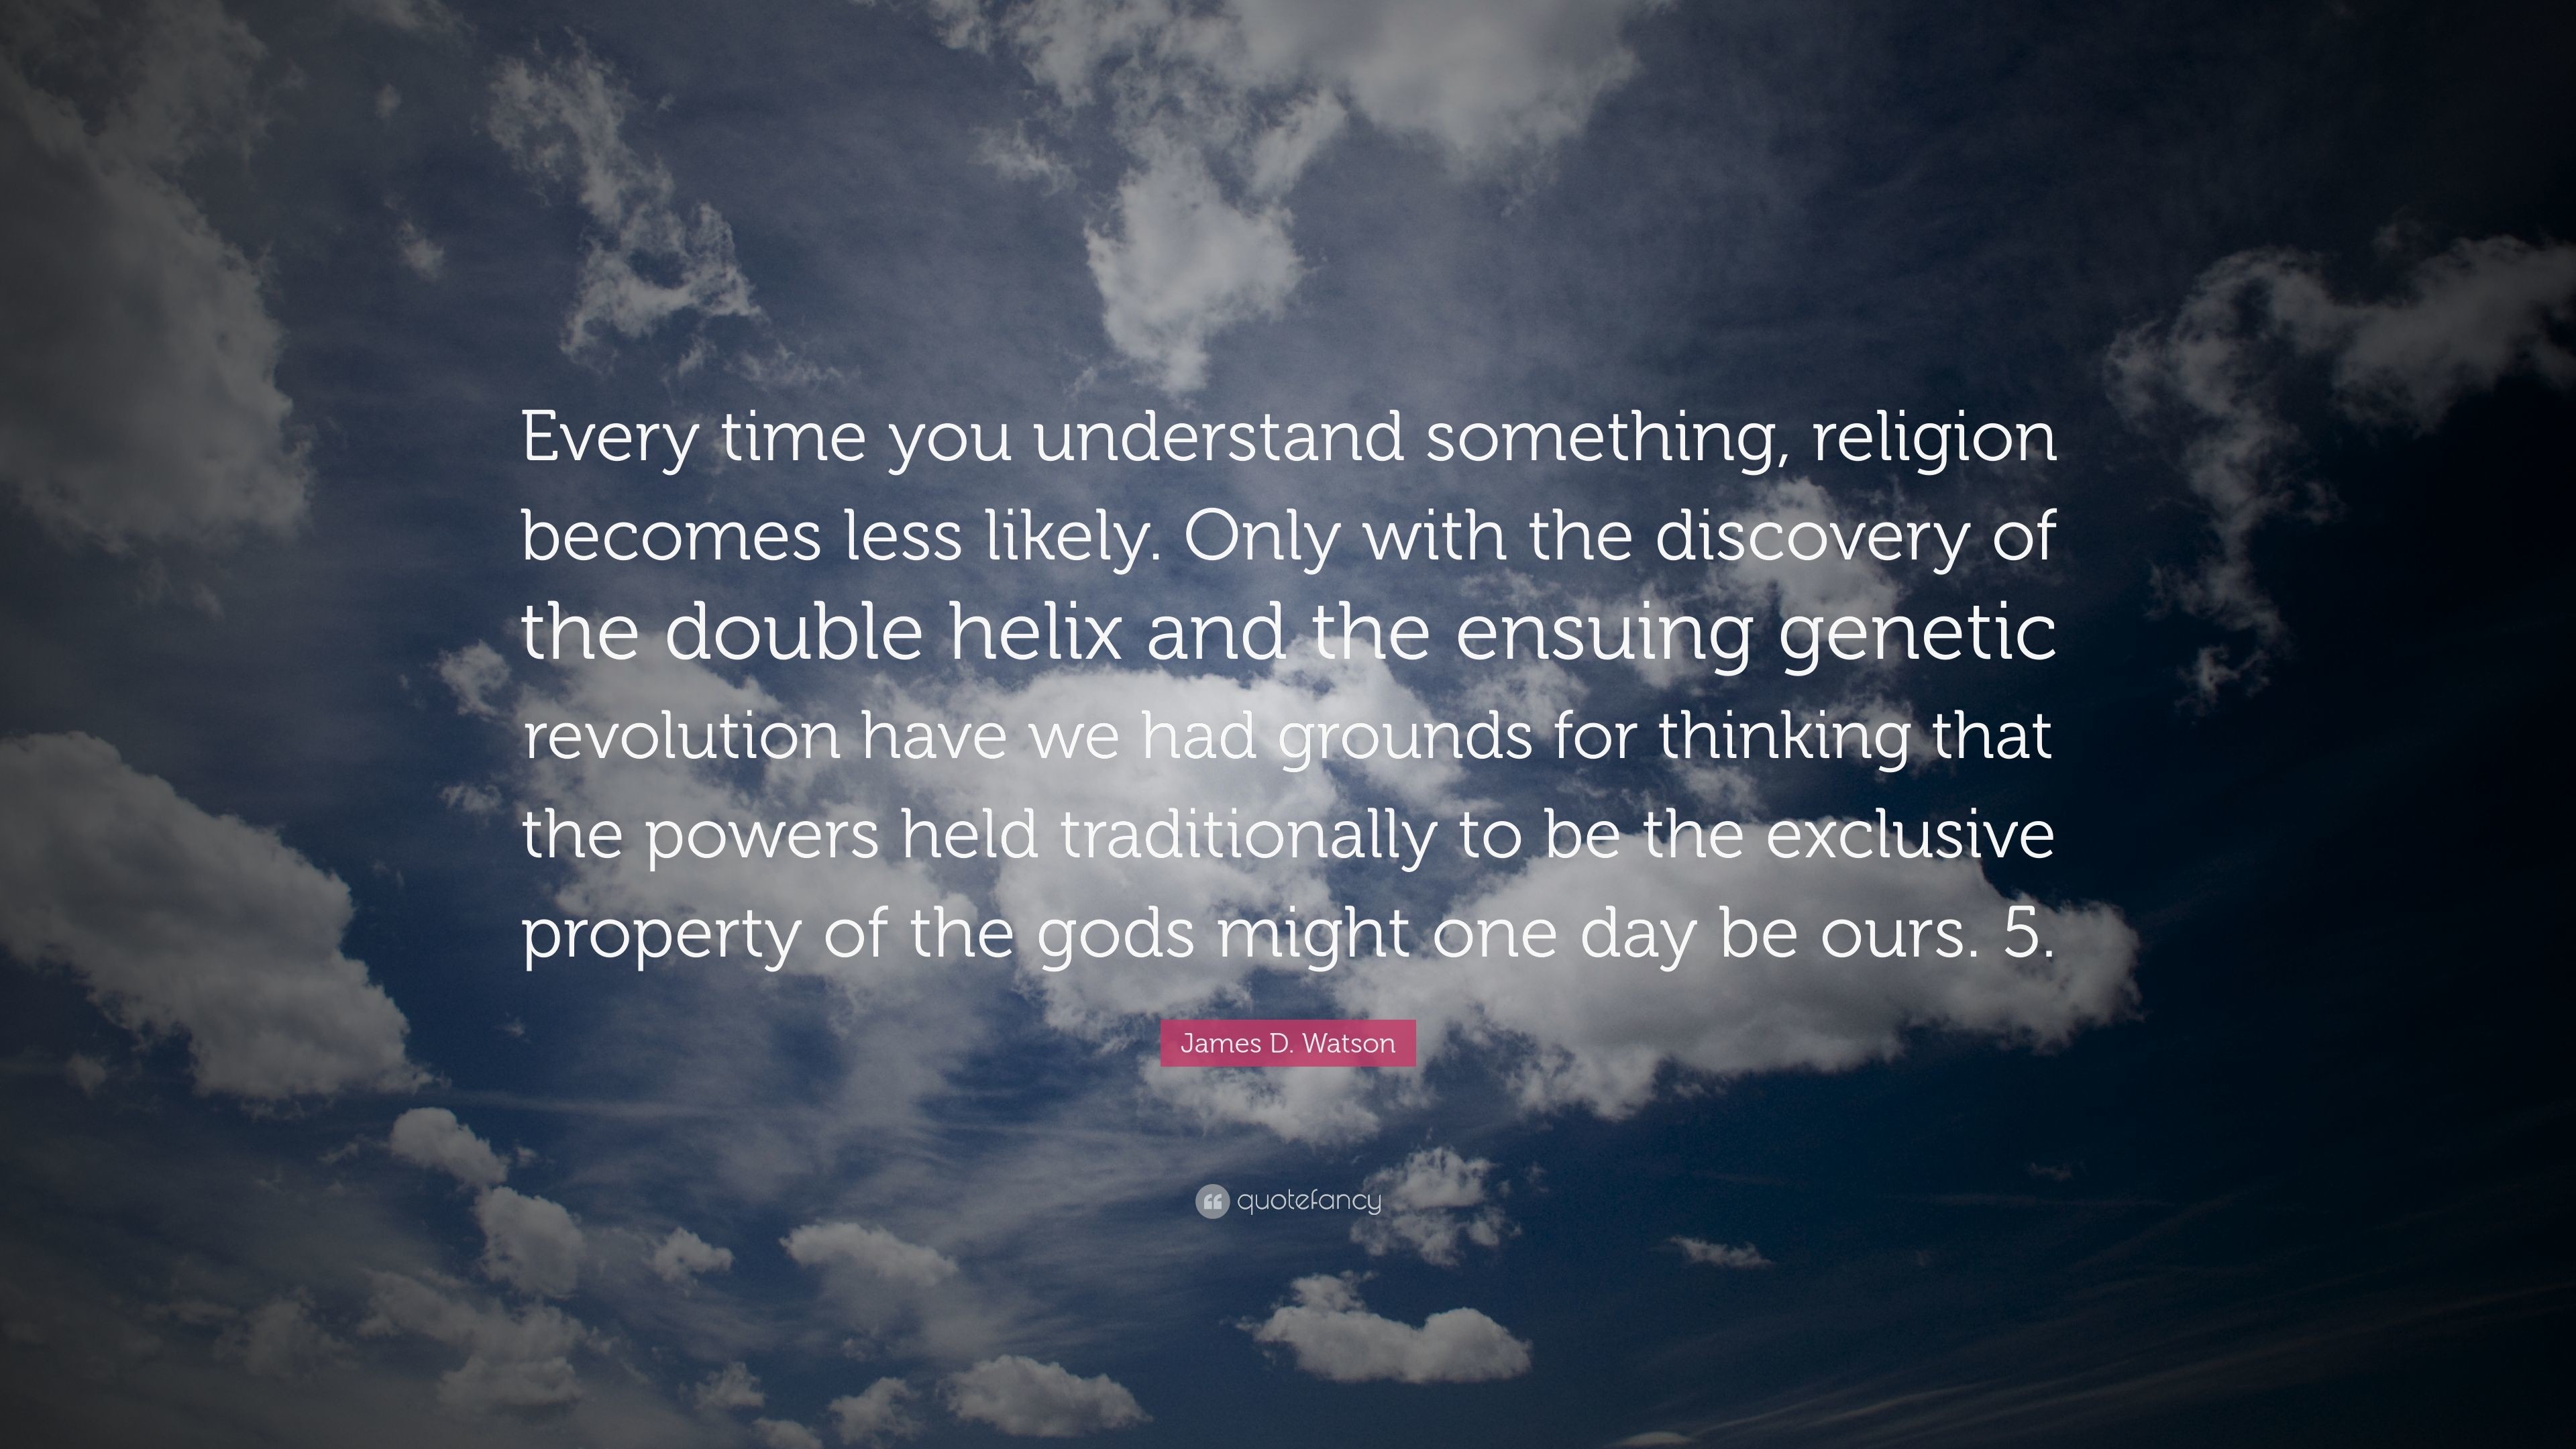 3840x2160 James D. Watson Quote: “Every time you understand something, religion  becomes less